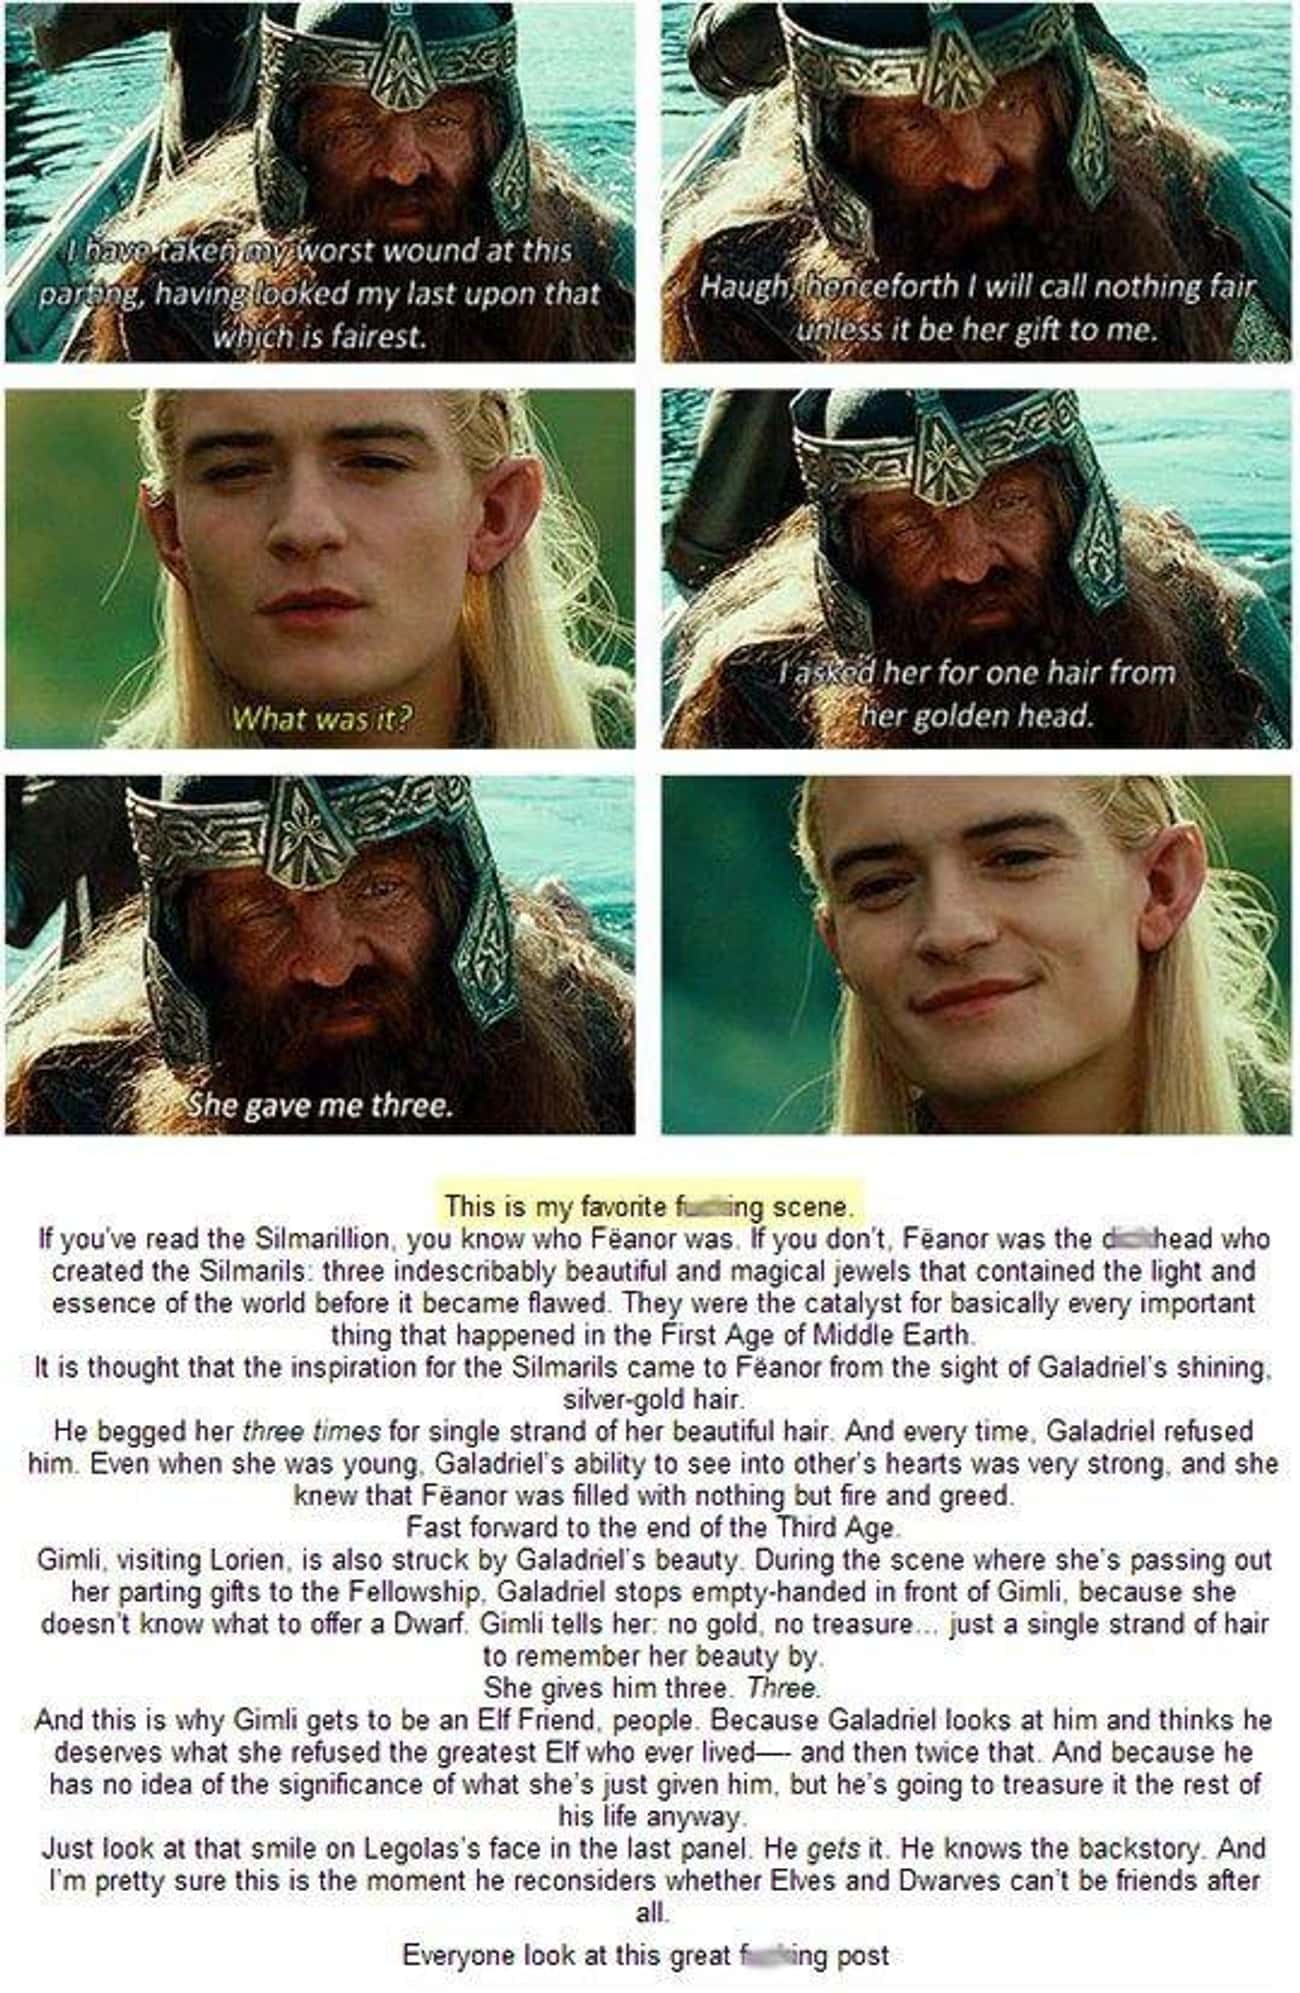 Gimli's Gift From Galadriel Means More To Legolas Than Gimli Realizes